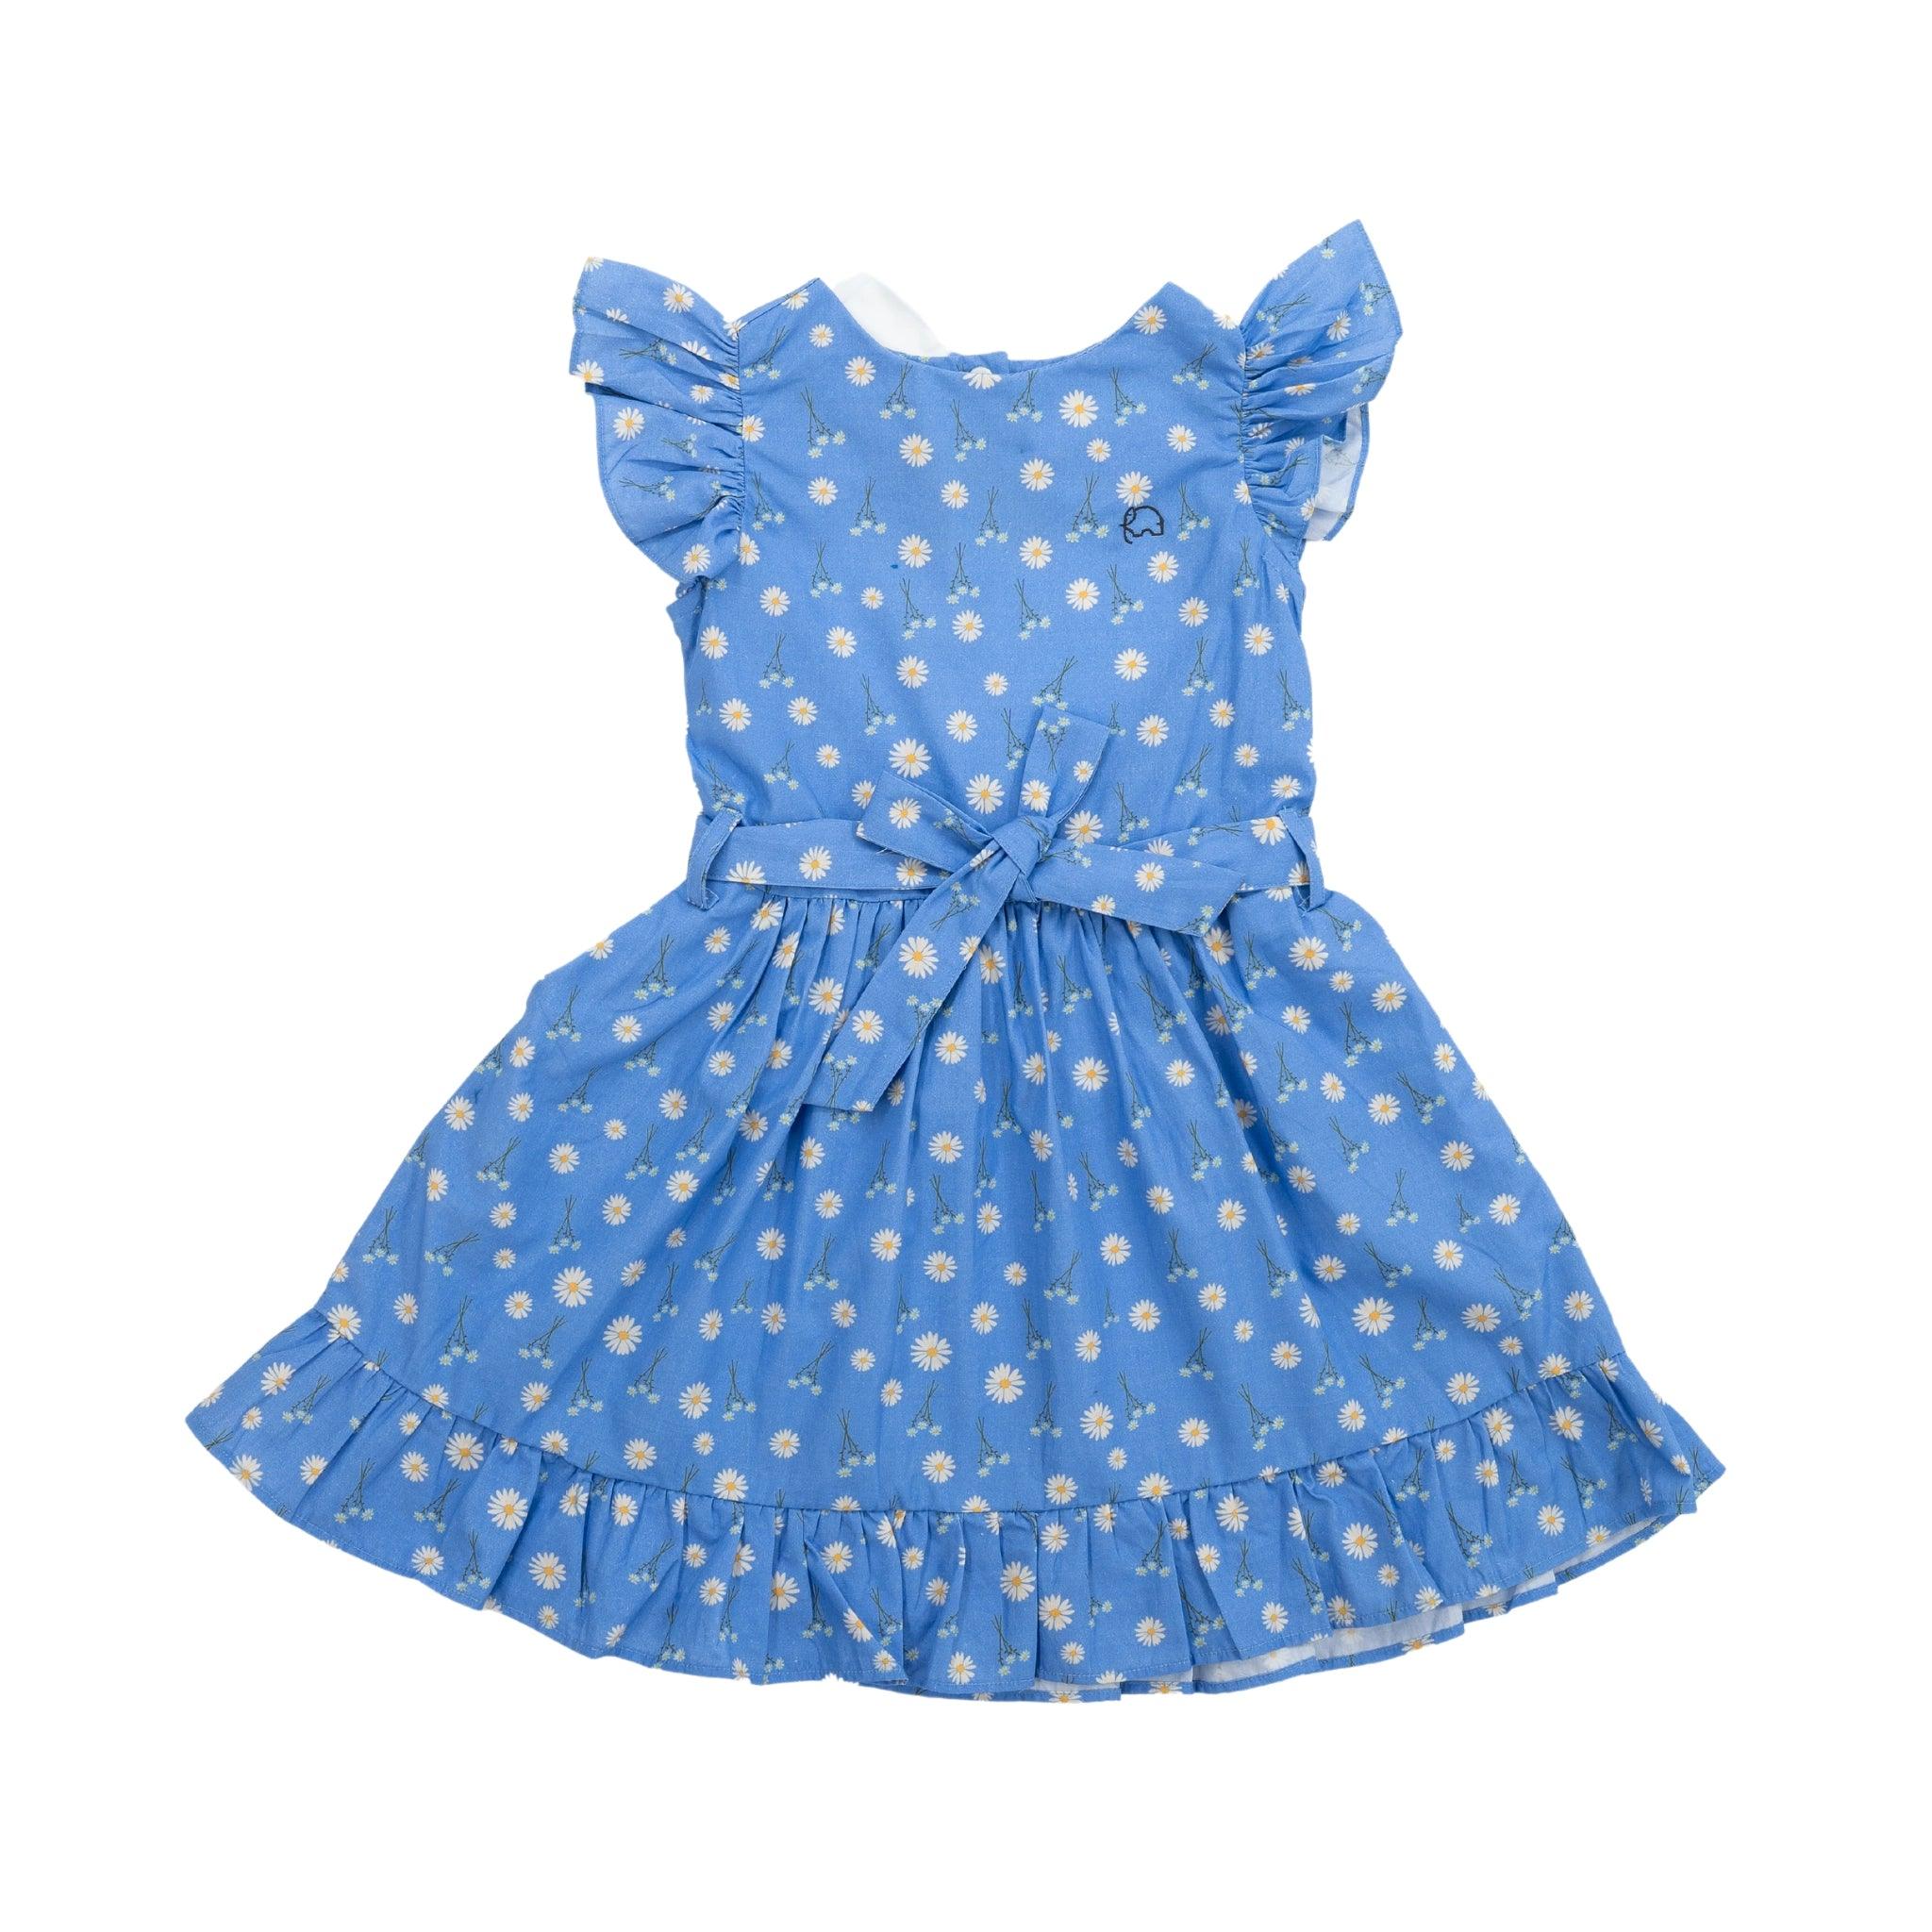 Karee Petite Blossom Cotton Dress in Corn Flour Blue with ruffled sleeves and a bow at the waist, displayed against a white background.